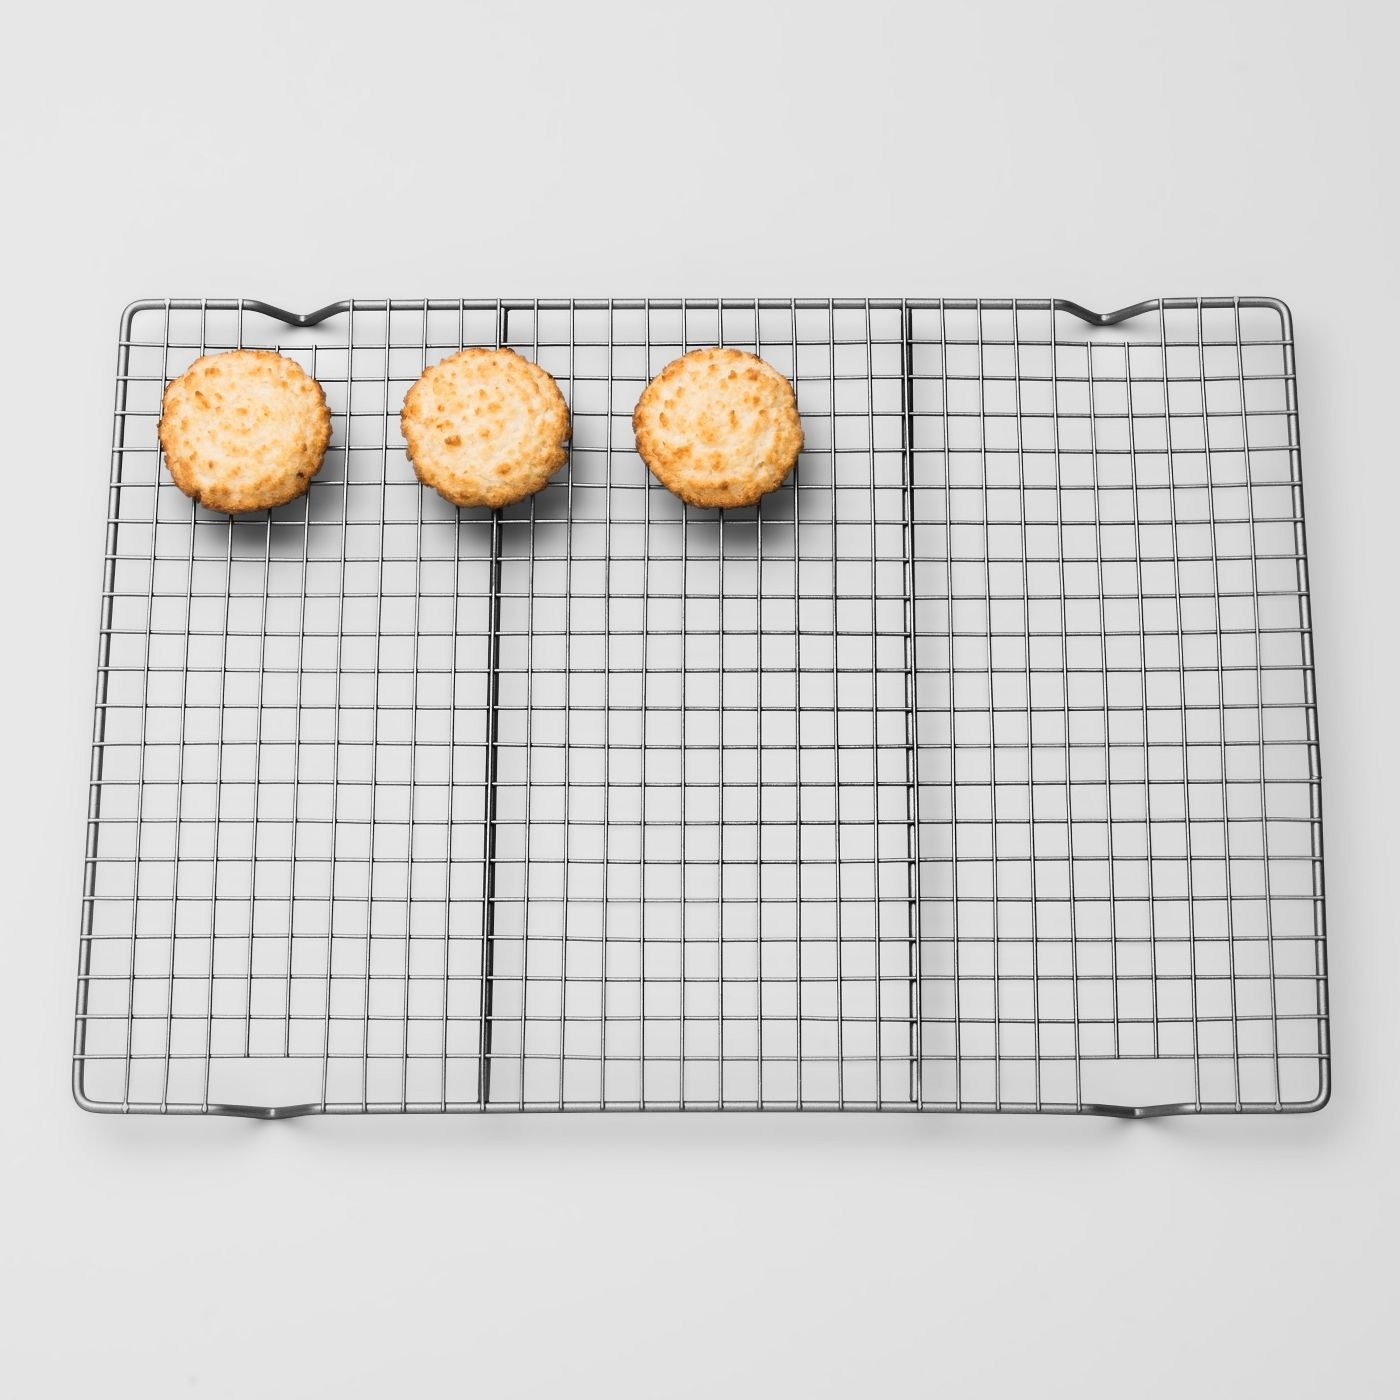 steel cooling rack with three cookies on top